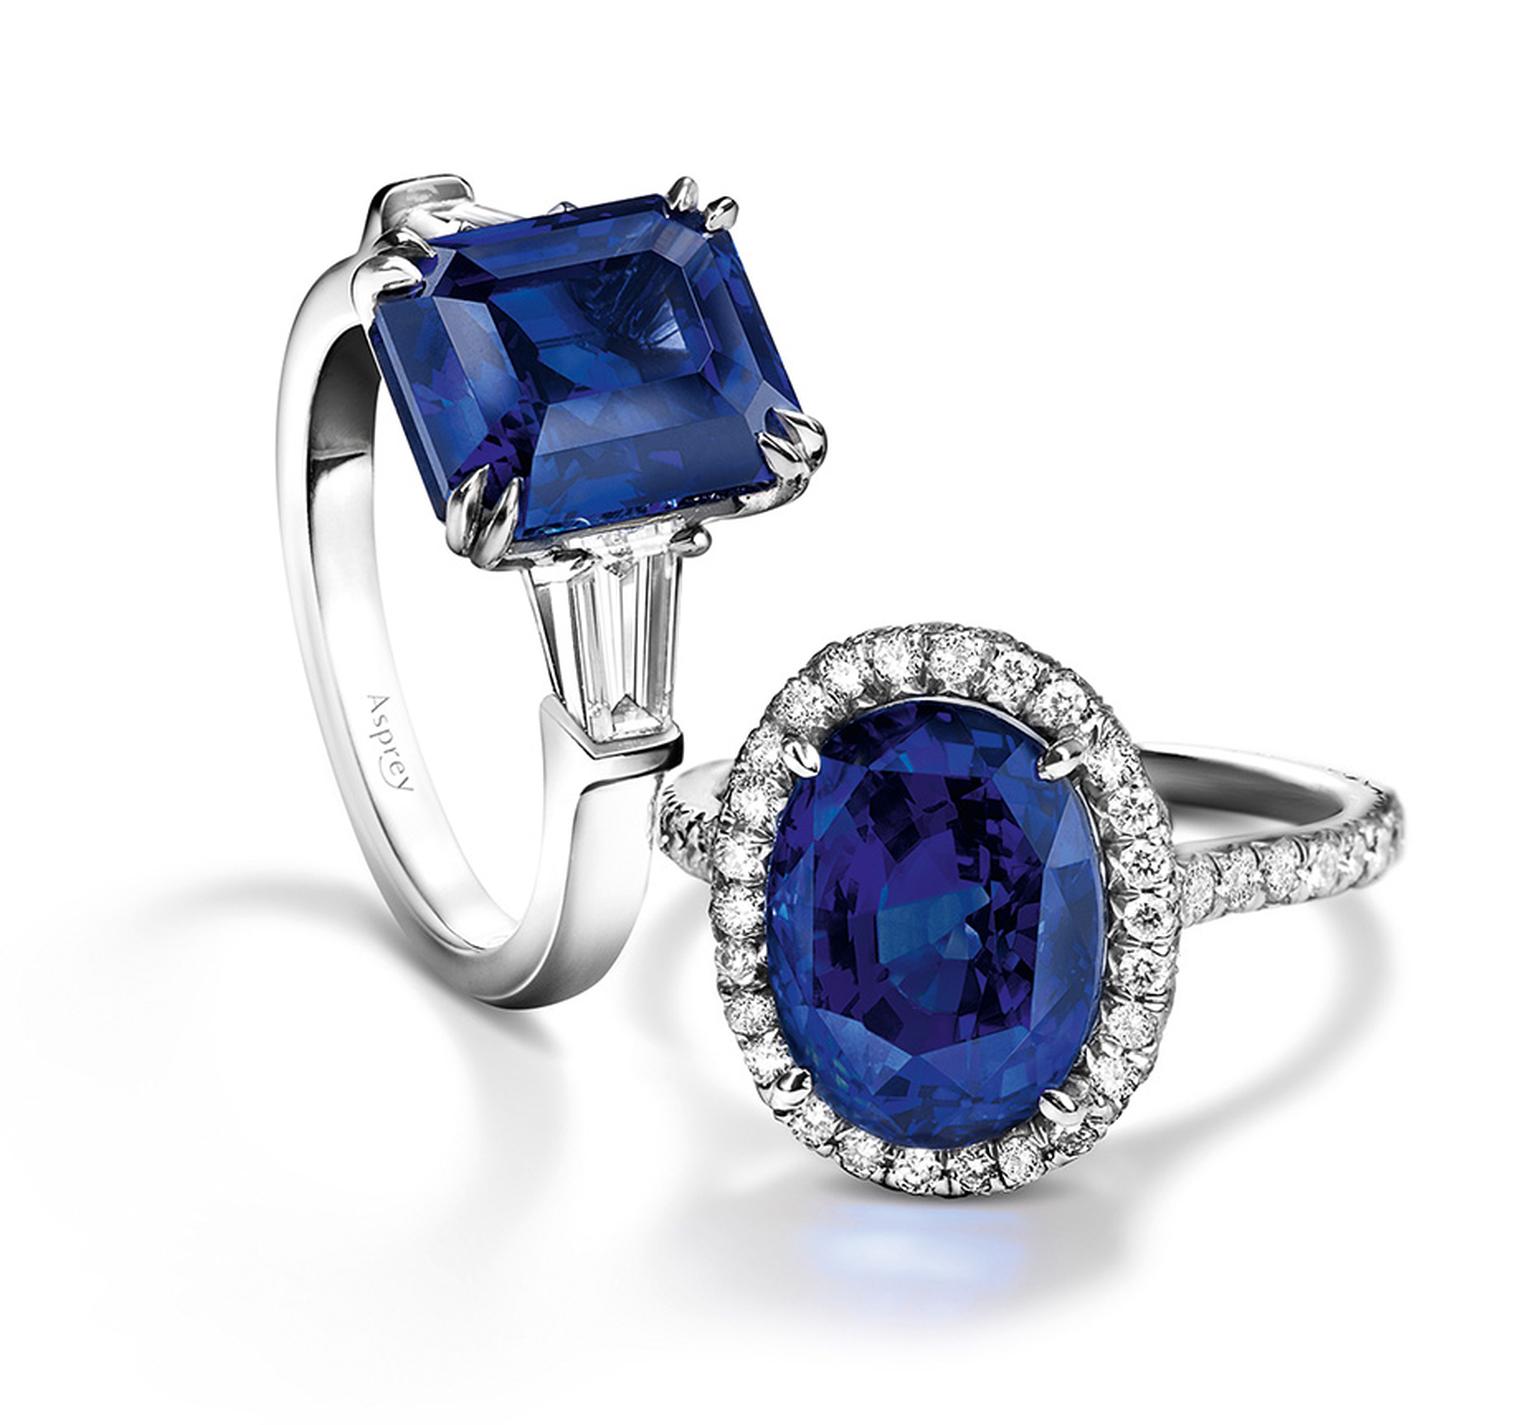 Asprey engagement rings with central sapphires